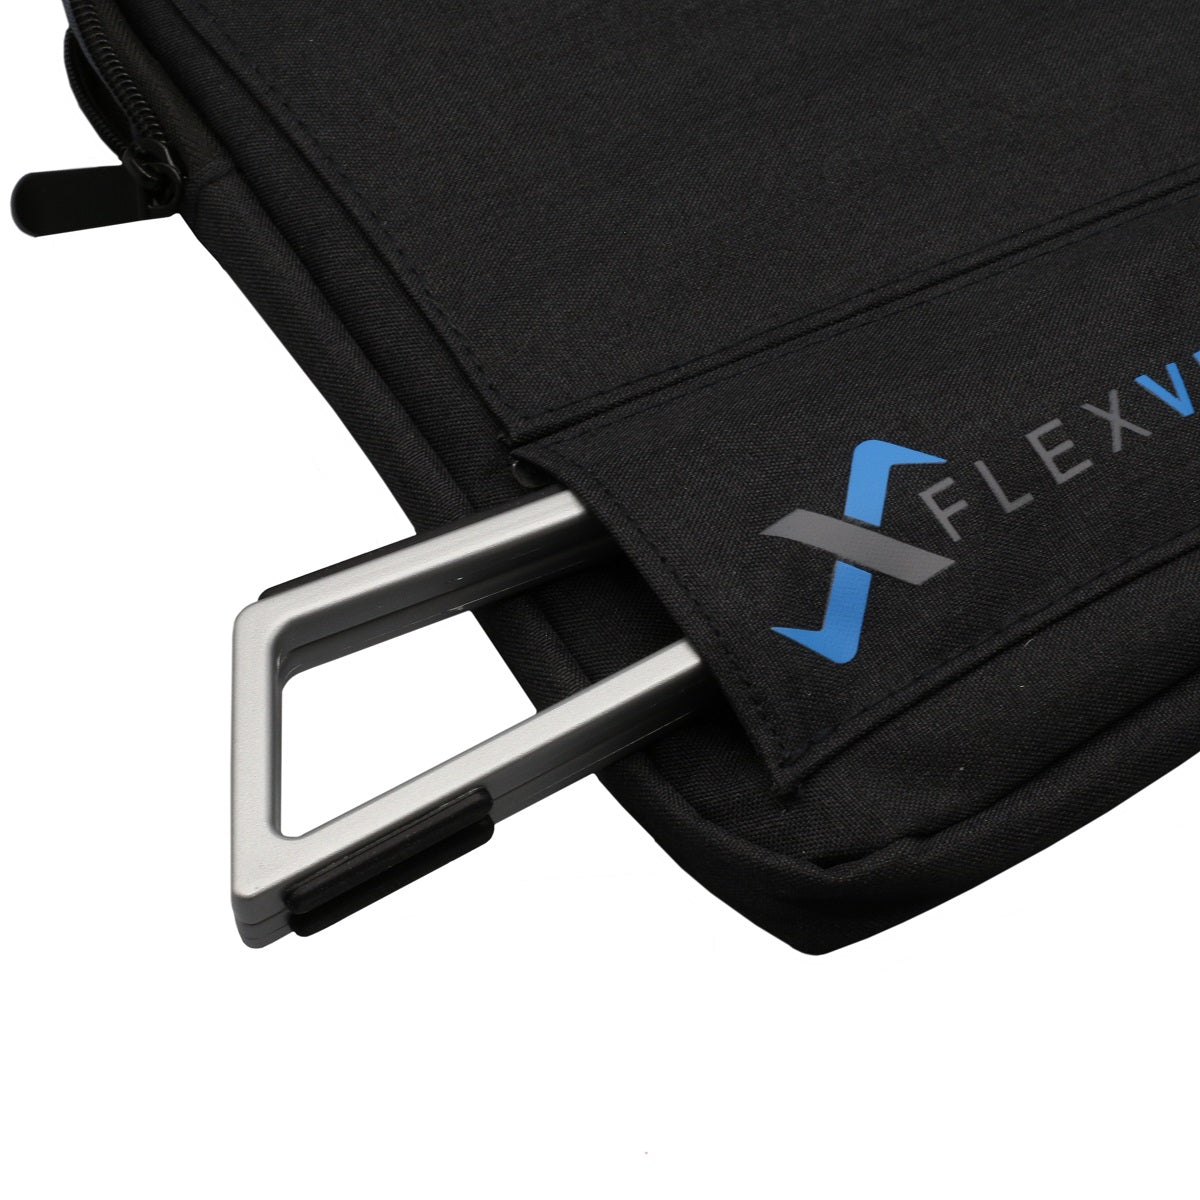 The FlexVerk Laptop Stand in silver inserted into the custom pocket of the FlexVerk Laptop Sleeve on a white background.